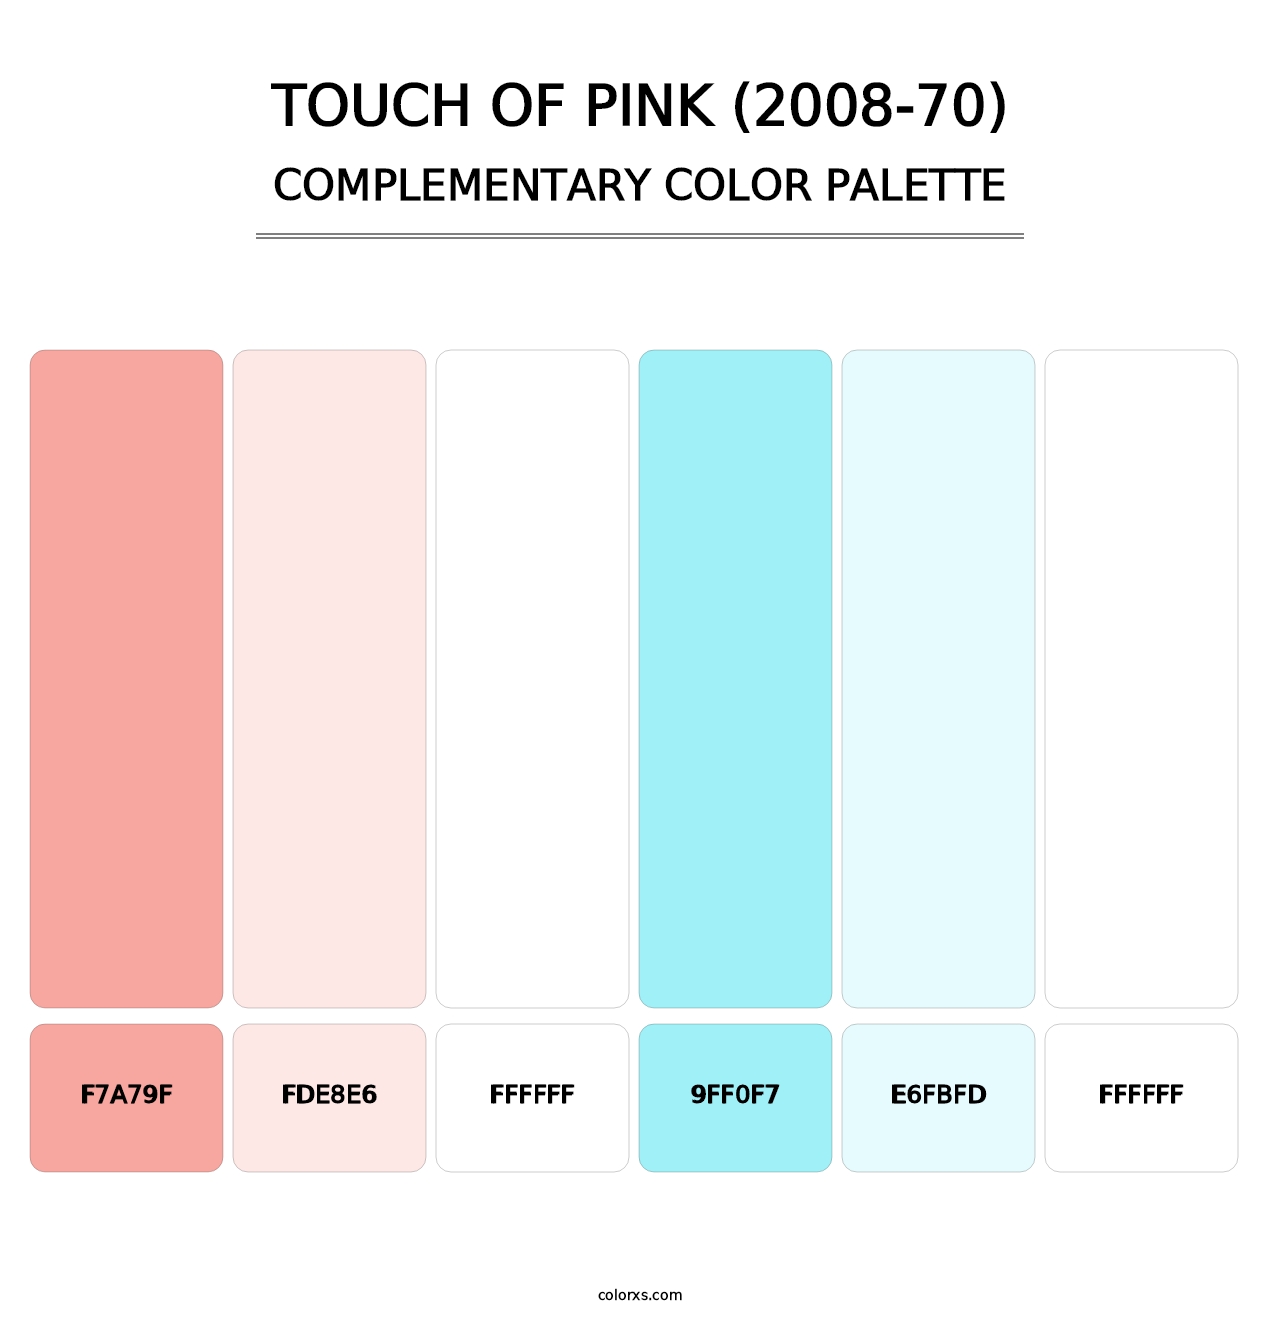 Touch of Pink (2008-70) - Complementary Color Palette